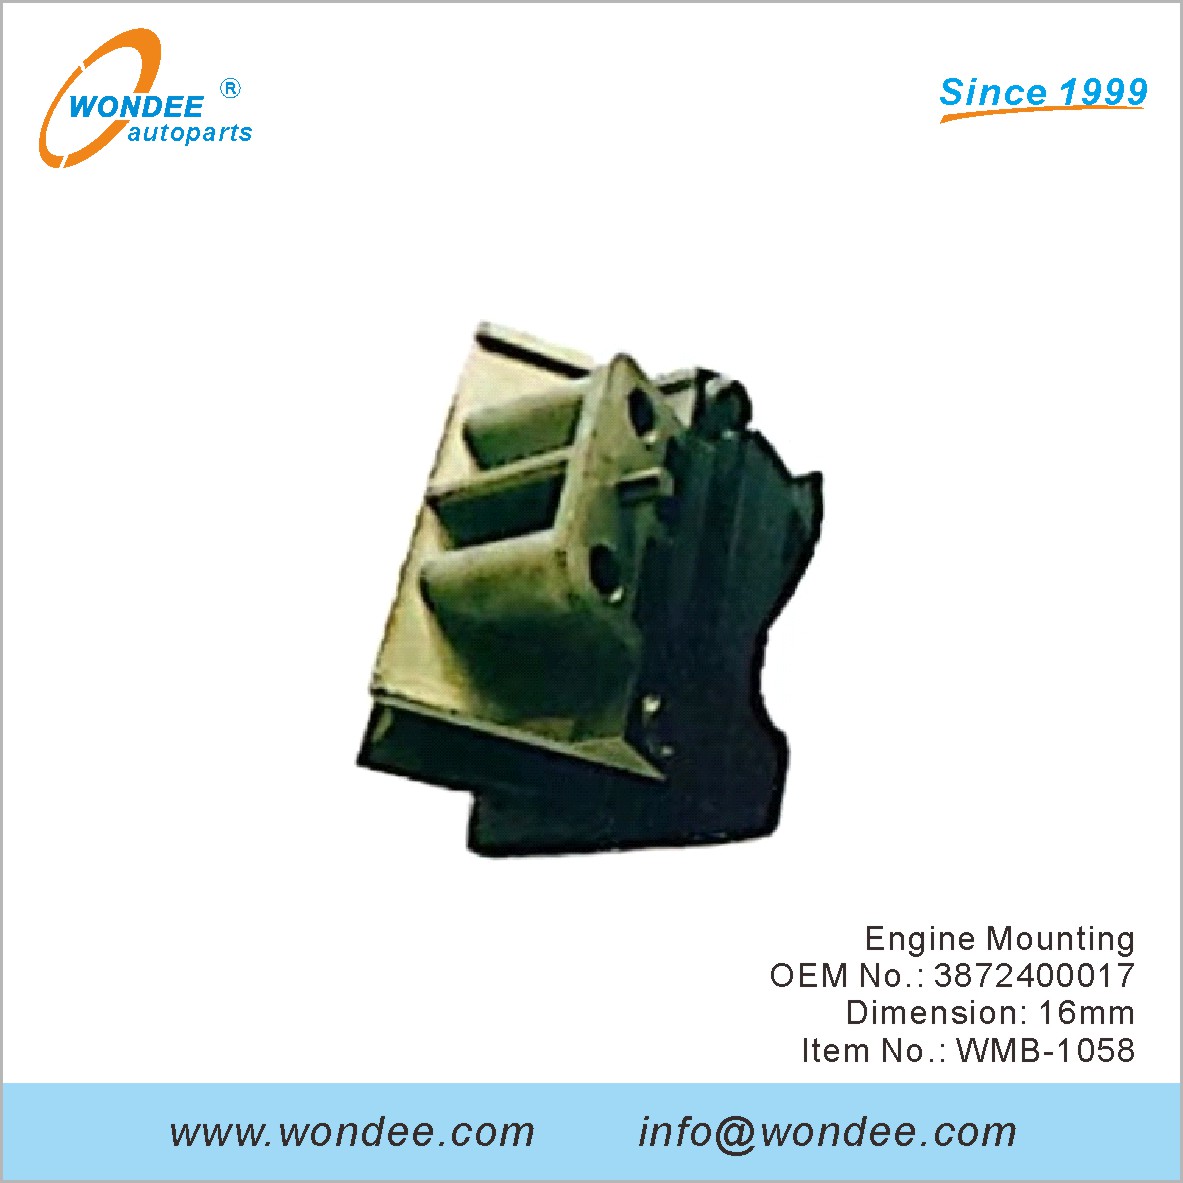 Engine Mounting OEM 3872400017 for Benz from WONDEE